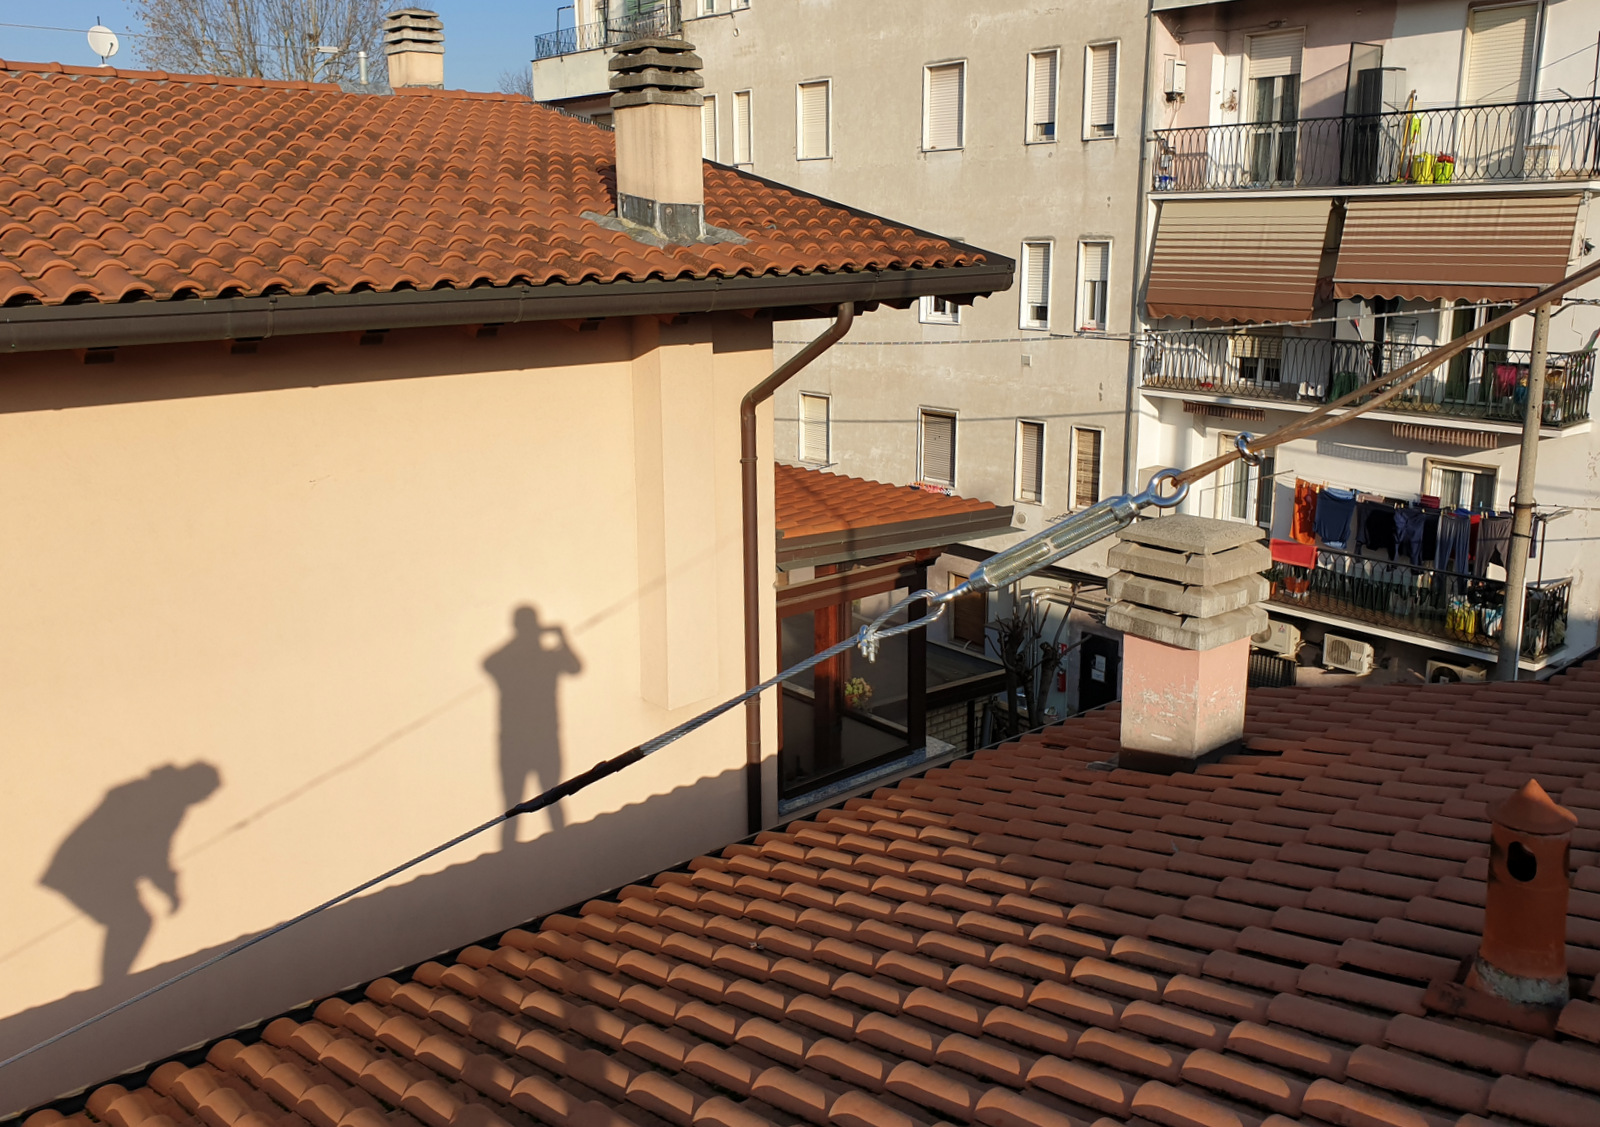 SELPHIE - ROOF